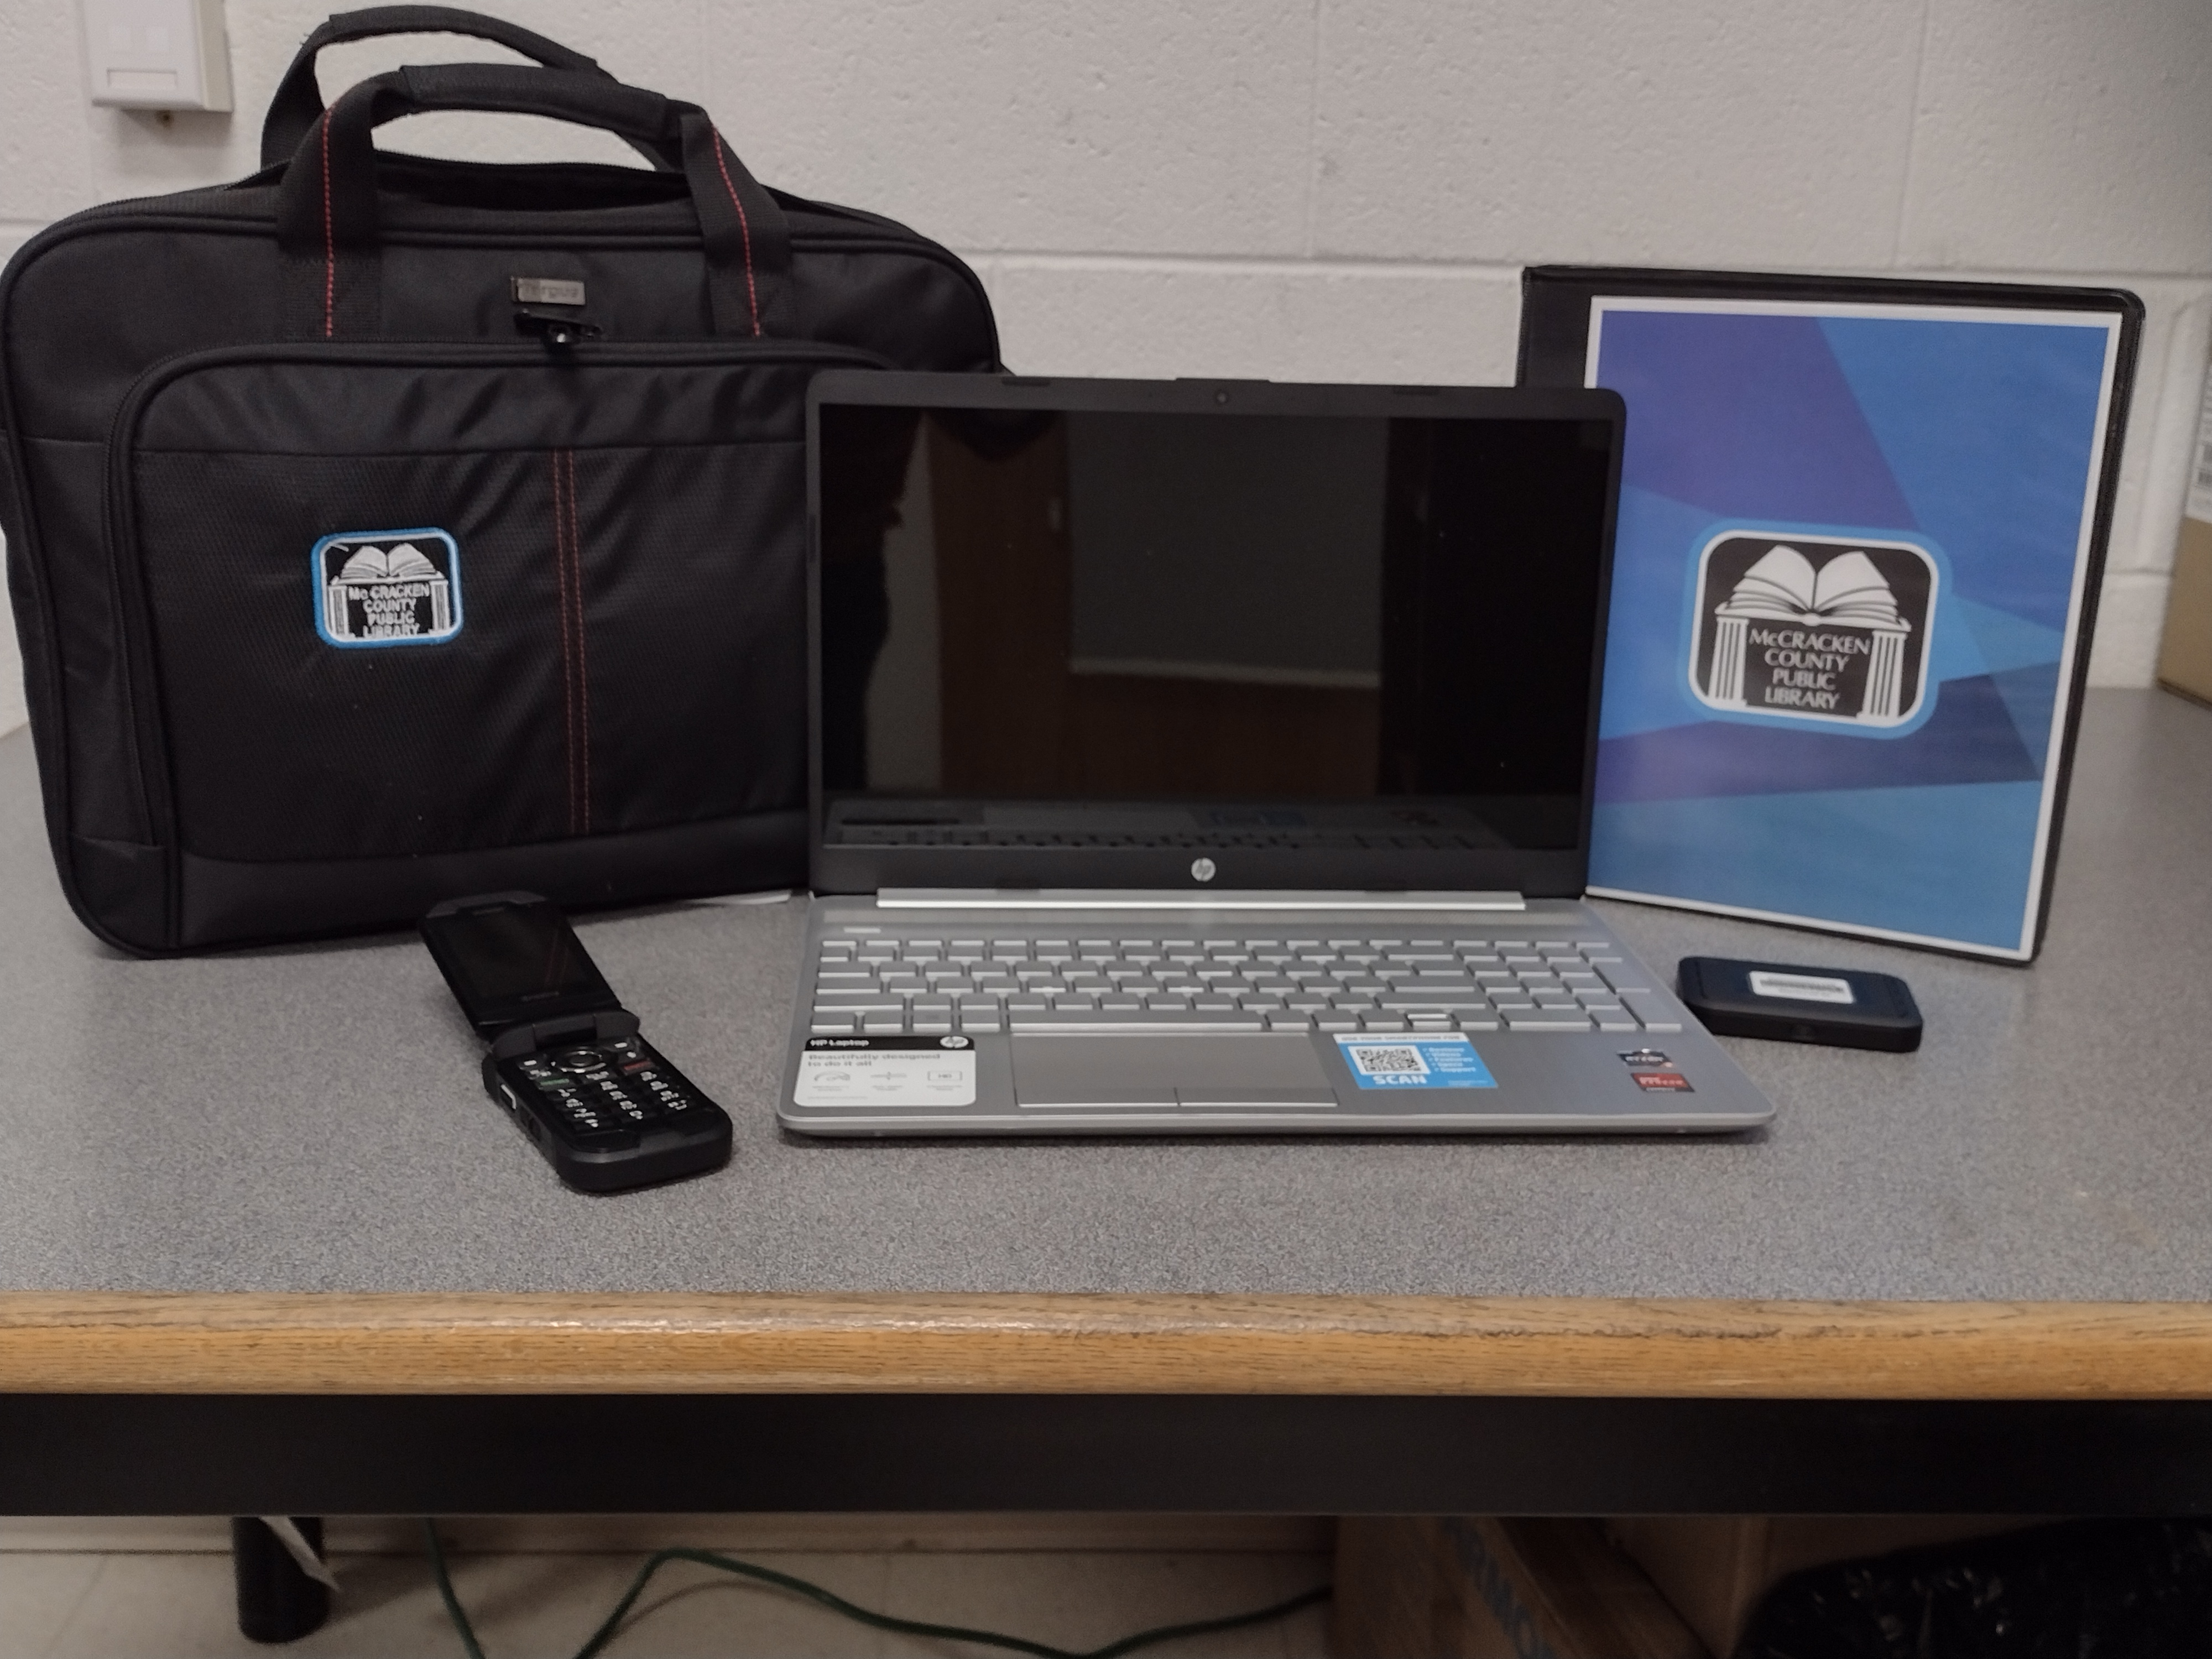 Photograph of the toolkit. Photo shows a black bag, Chrome book, cell phone, flash drive and folder of resources.